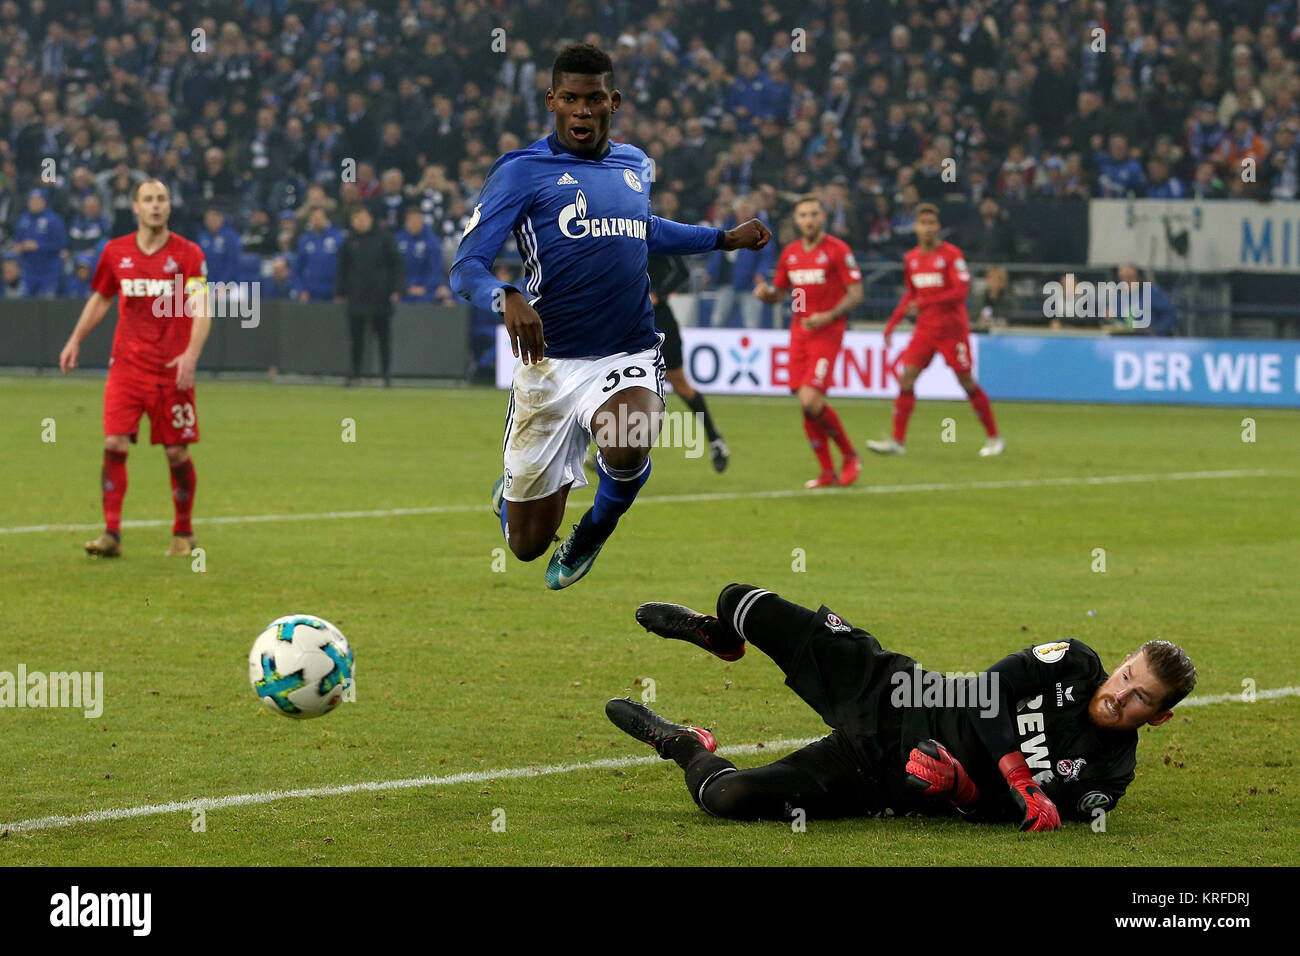 Gelsenkirchen, Germany. 19th Dec, 2017. Breel Embolo of Schalke 04 competes during the German DFB Pokal match between Schalke 04 and FC Koln at the Veltins Arena in Gelsenkirchen, Germany, on Dec. 19, 2017. Credit: Joachim Bywaletz/Xinhua/Alamy Live News Stock Photo